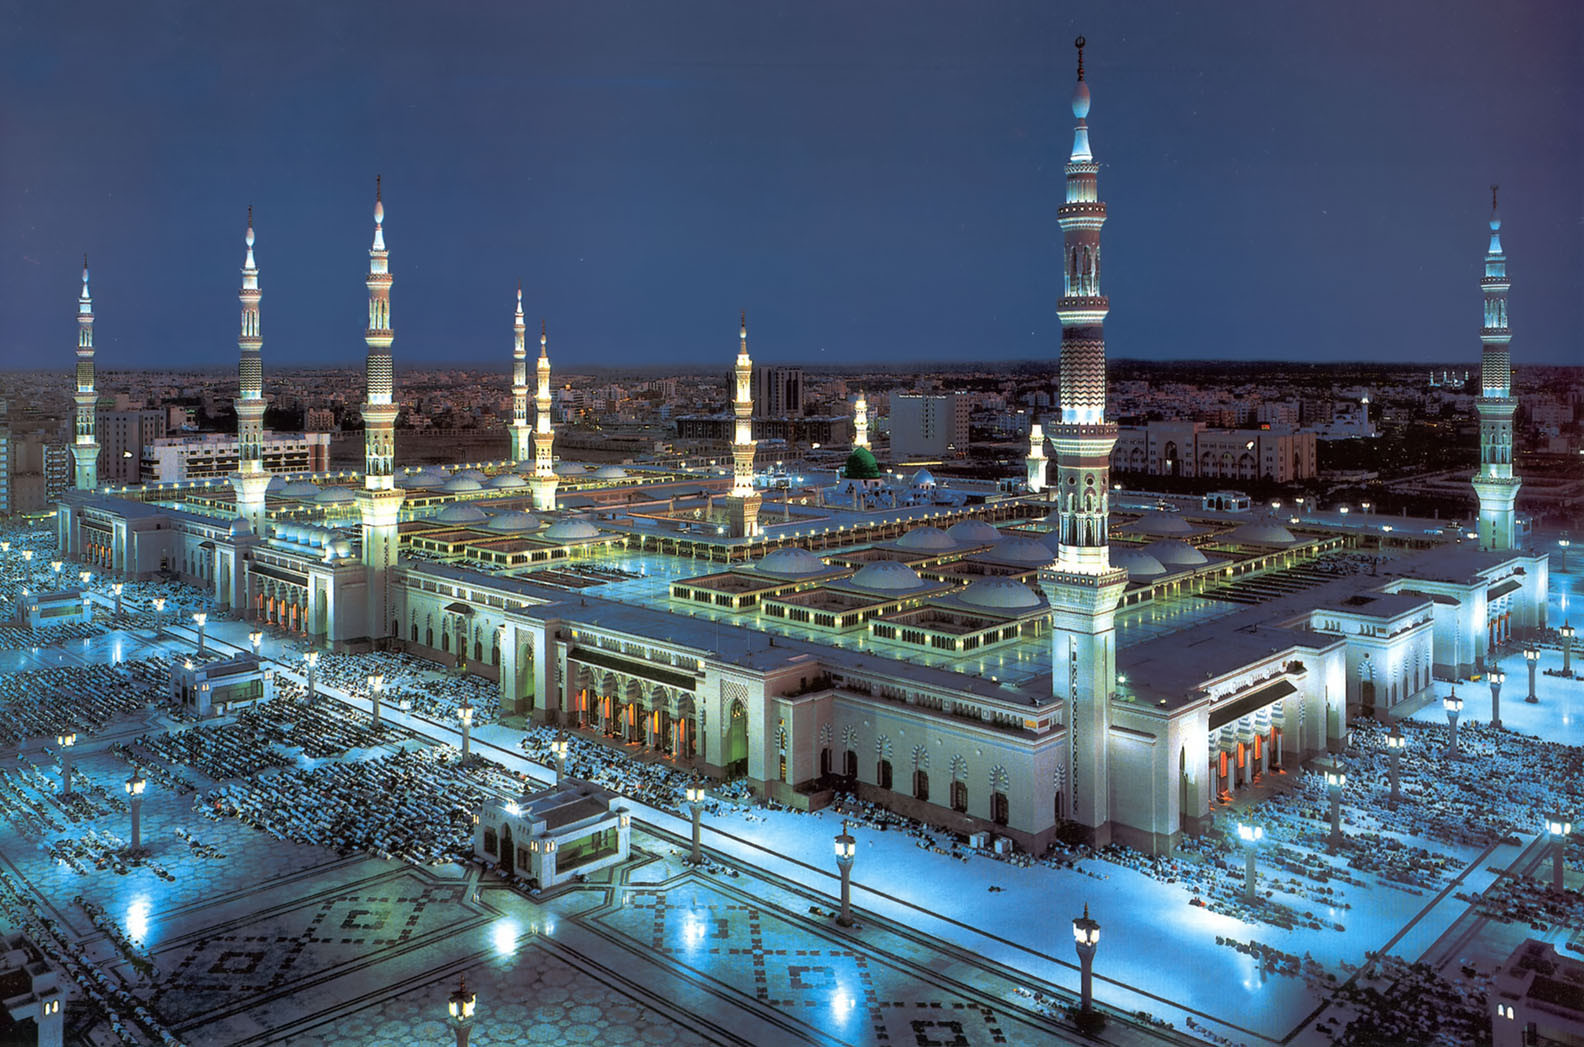 Al-Masjid an-Nabawi - beautiful religious site